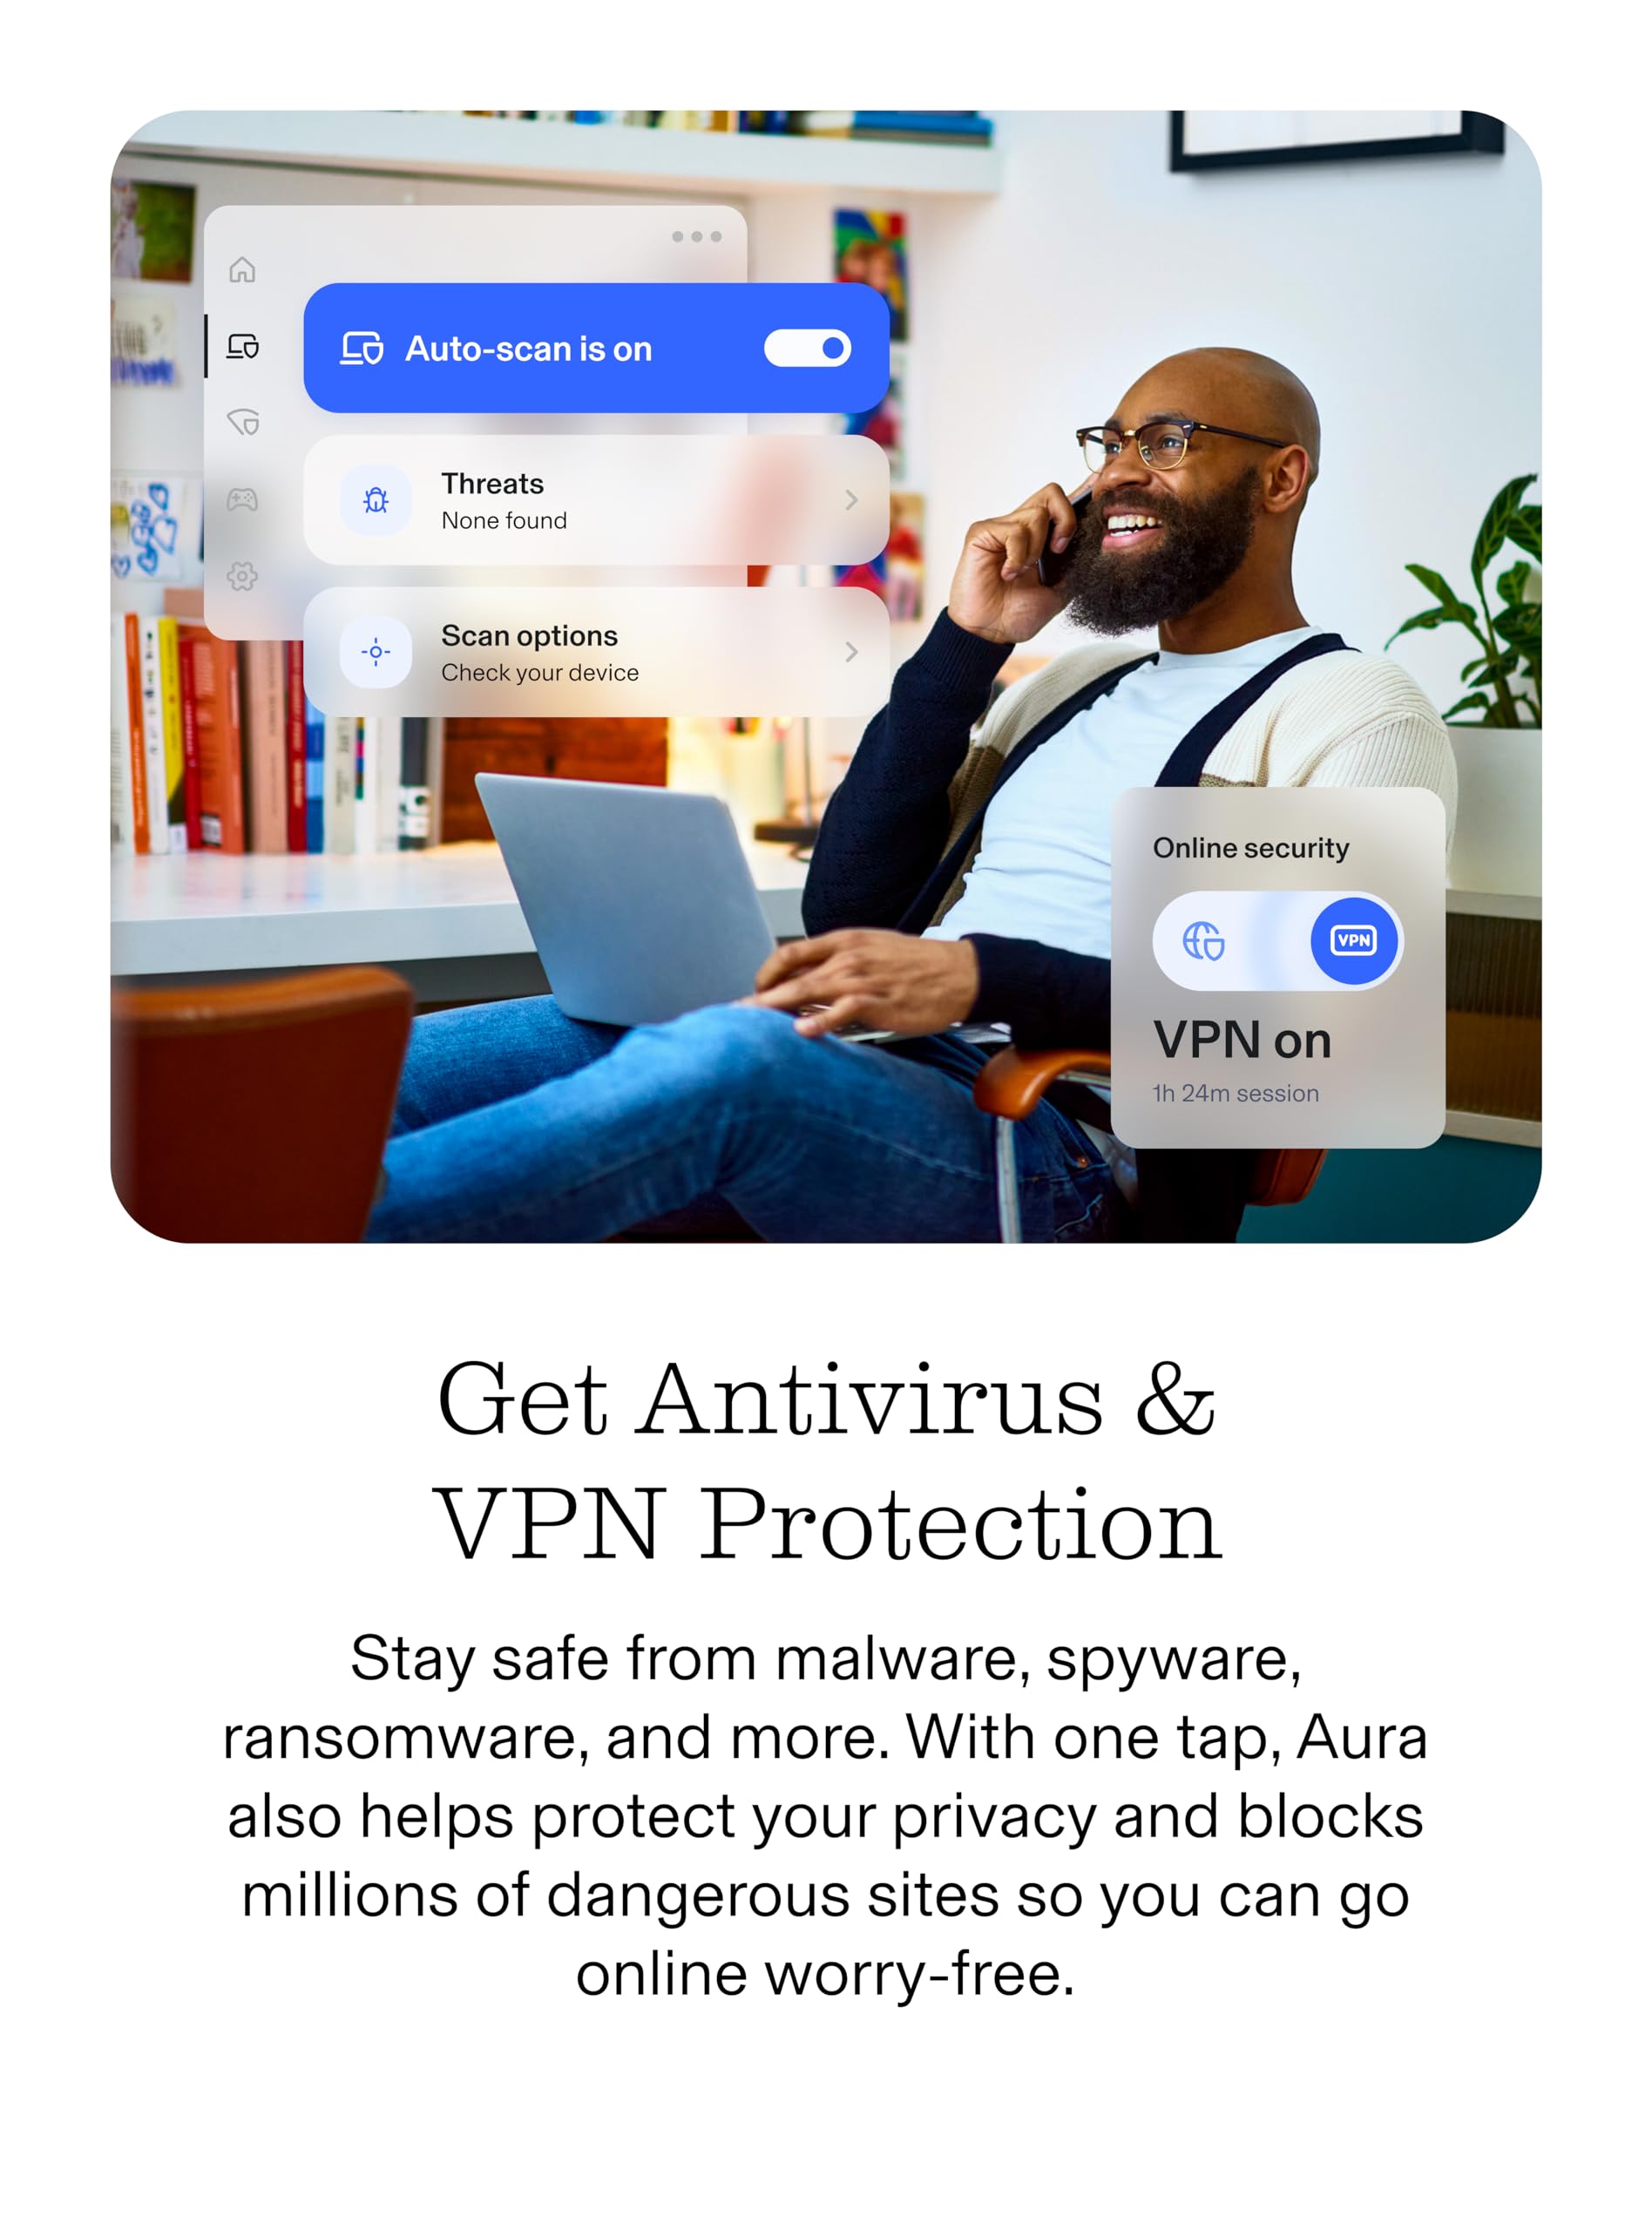 Aura Premium Online Safety | Parental Controls by Circle, Antivirus, VPN | Content Blocking, Filtering, Screen Time Limits | Android, iOS, Mobile, Tablet | 1 Yr Prepaid Subscription [Online Code]